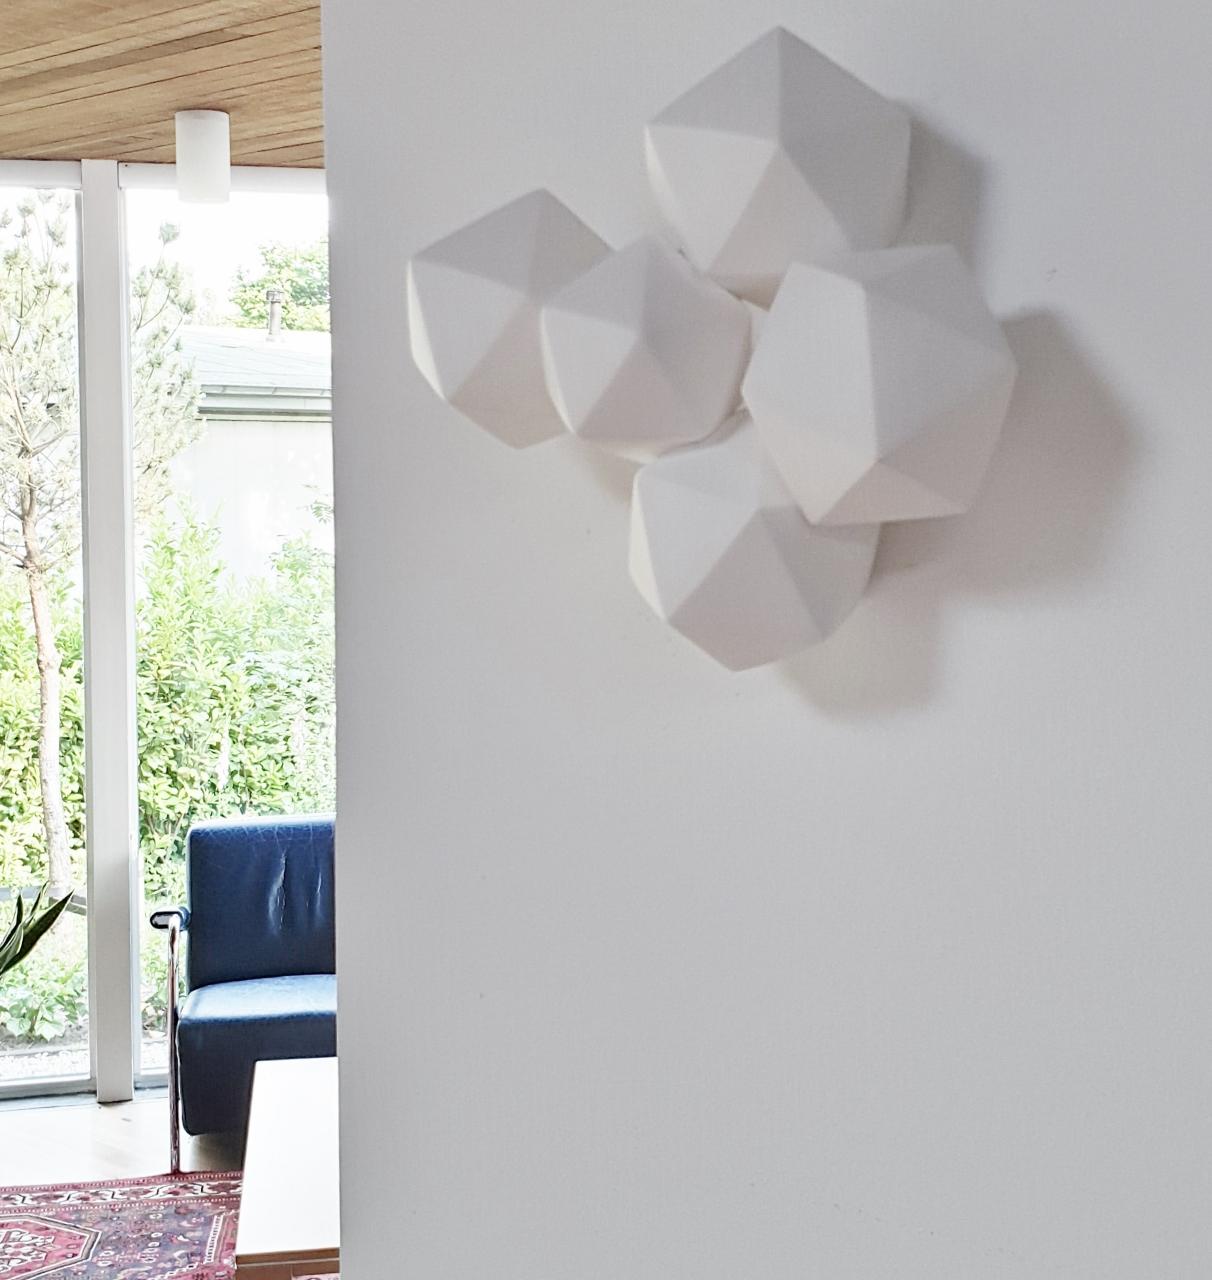 Icosahedron 5 - contemporary modern abstract geometric ceramic wall sculpture - Sculpture by Mo Cornelisse